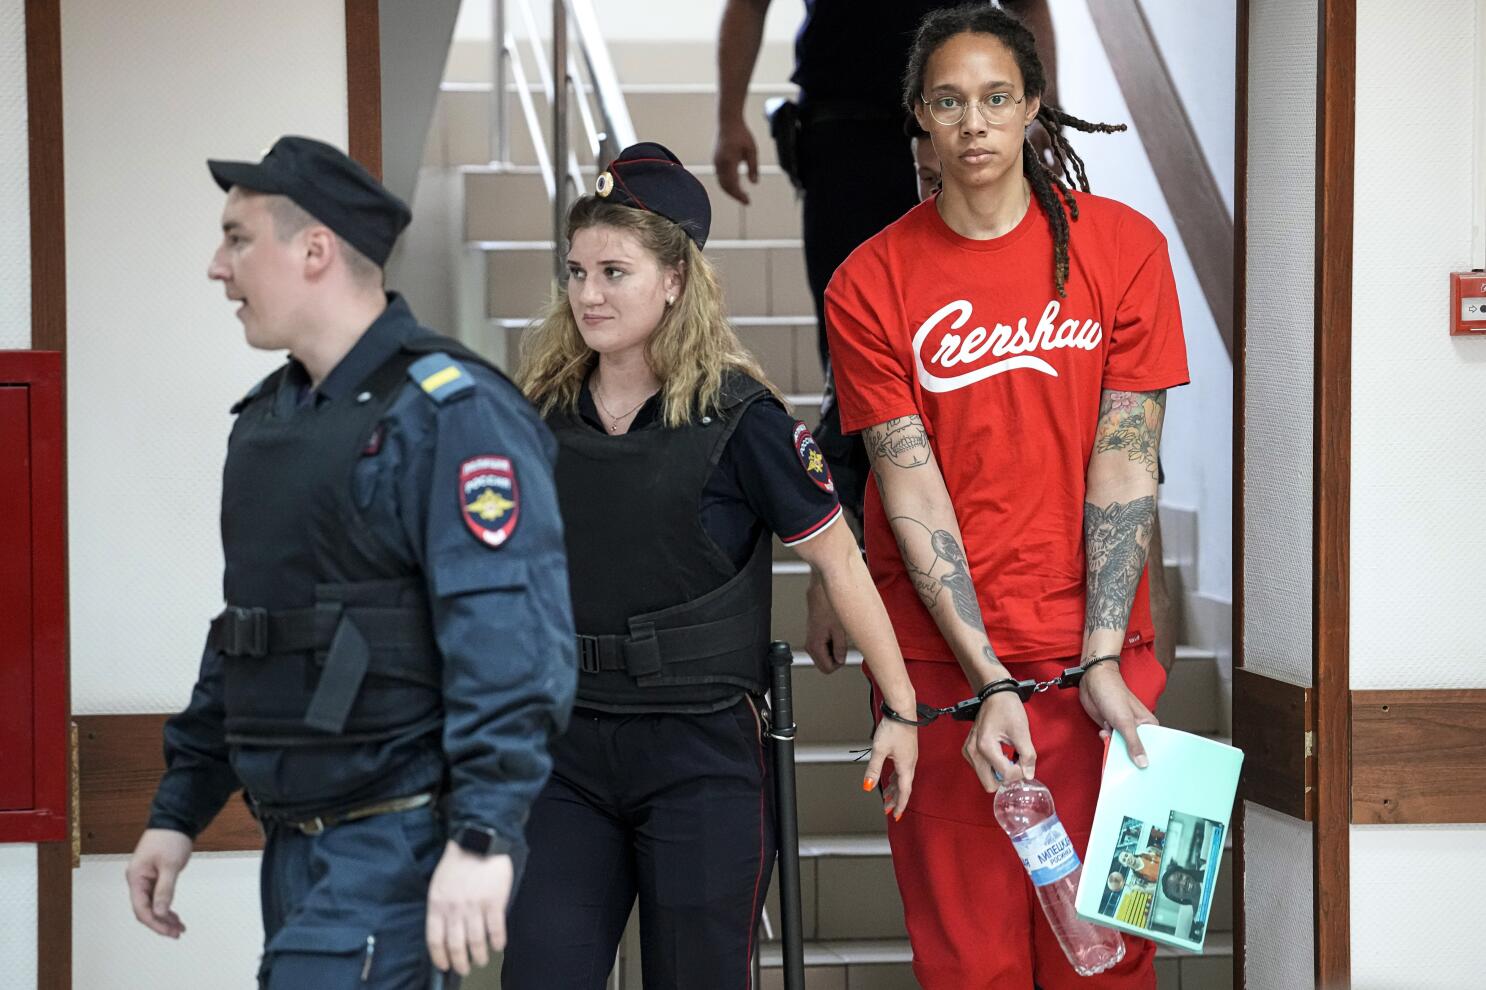 Brittney Griner: US basketball star to stand trial in Russian court on drug  charges, NBA News